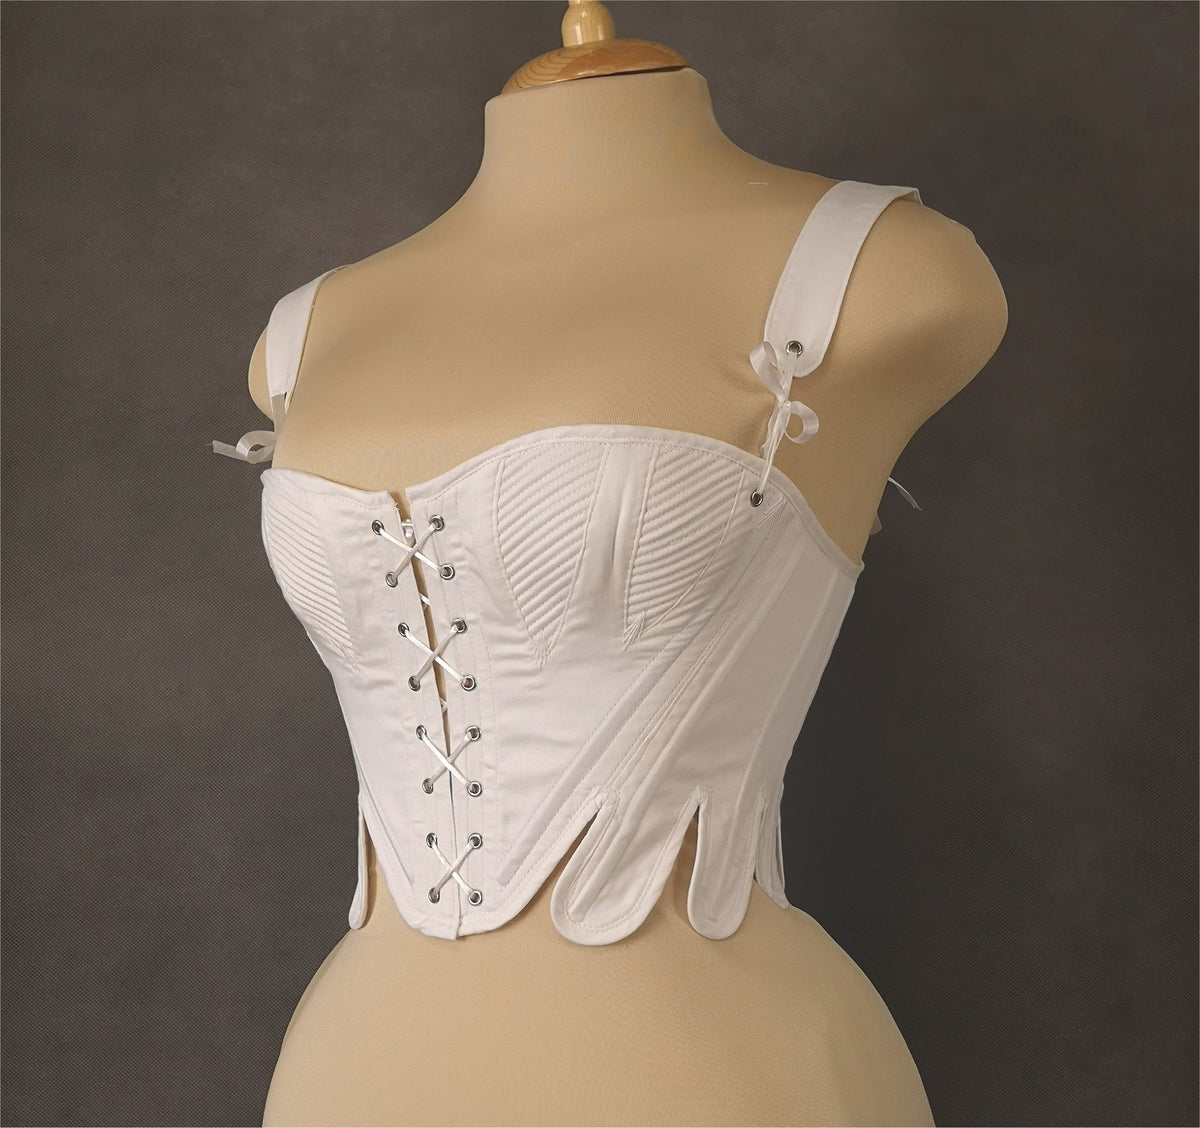 Victorian corset with gussets 1860s - Custom order  –  Nemuro Corsets